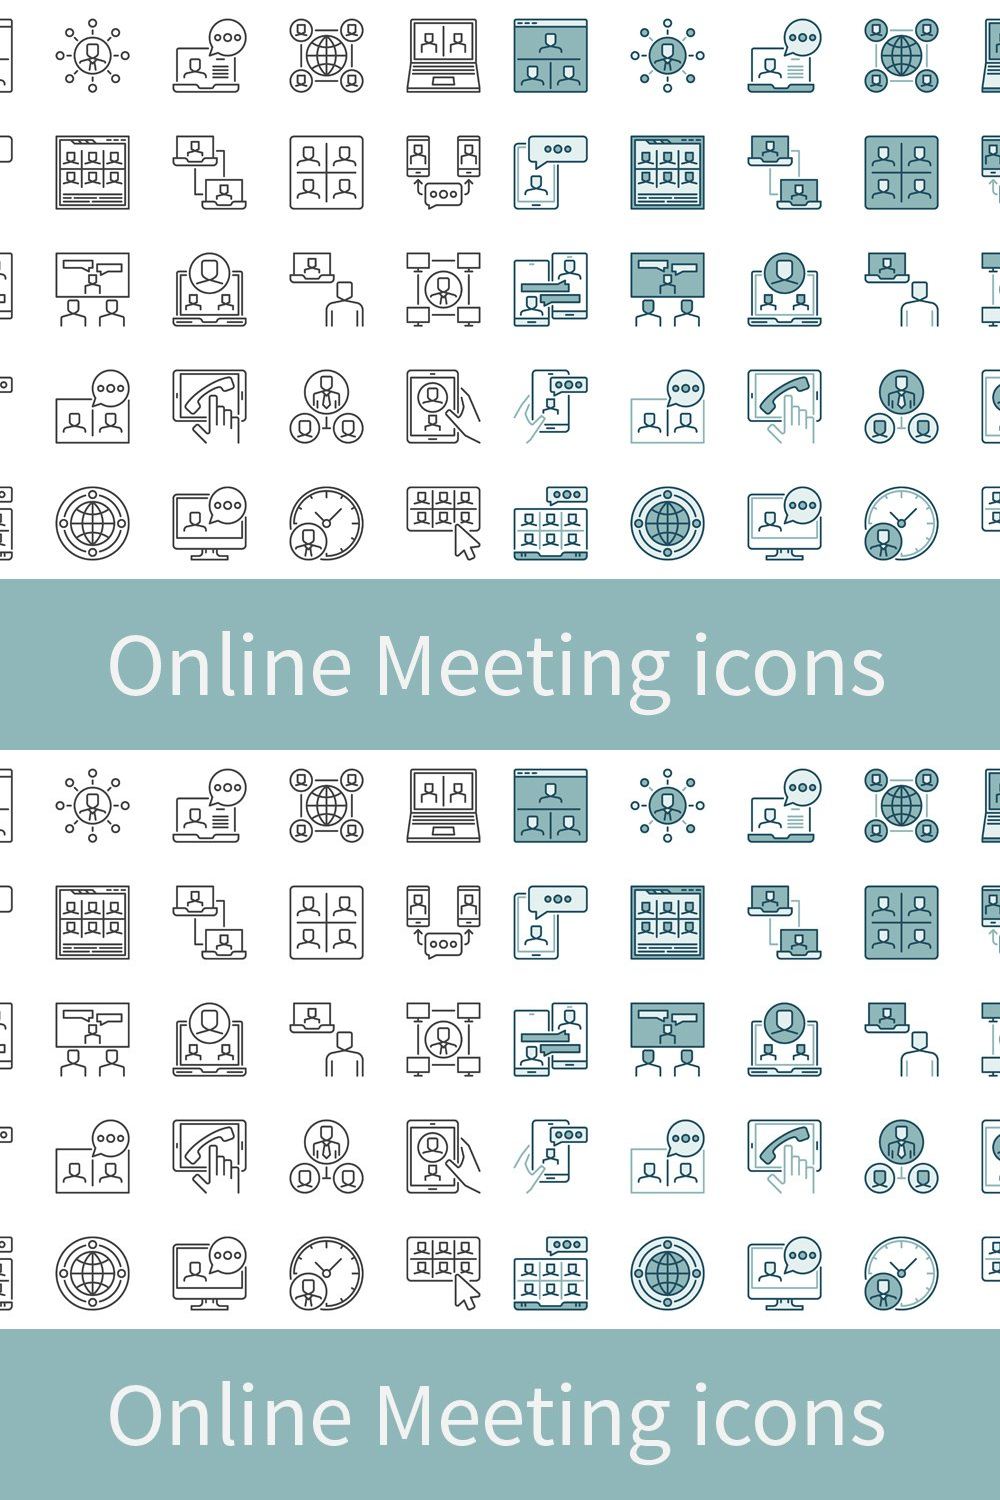 Illustrations online meeting icons set of pinterest.